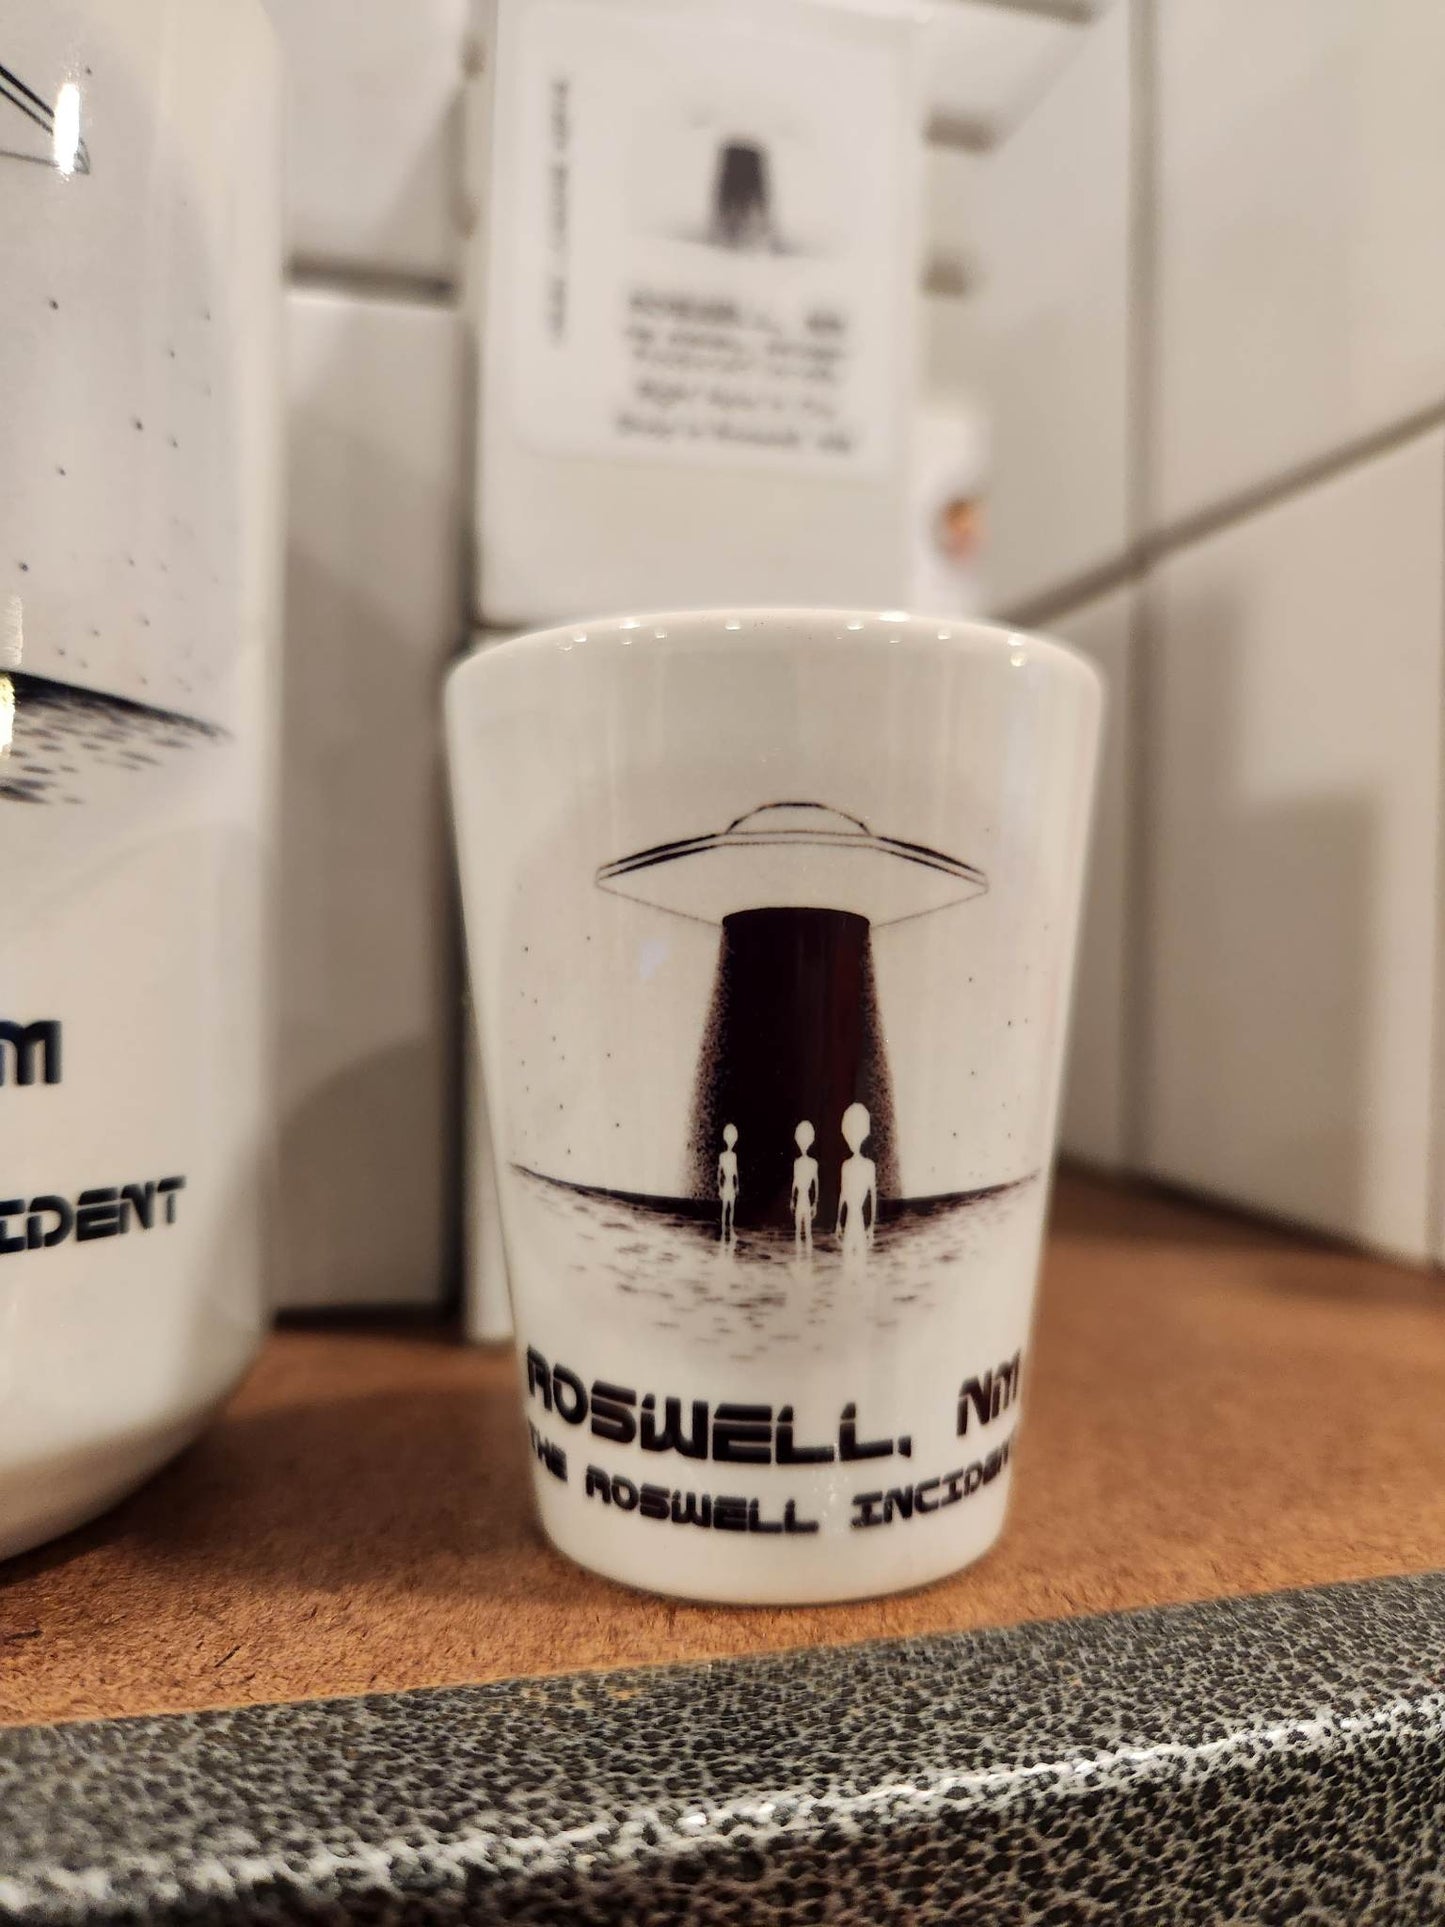 The Roswell Incident 1.5oz Shot Glass